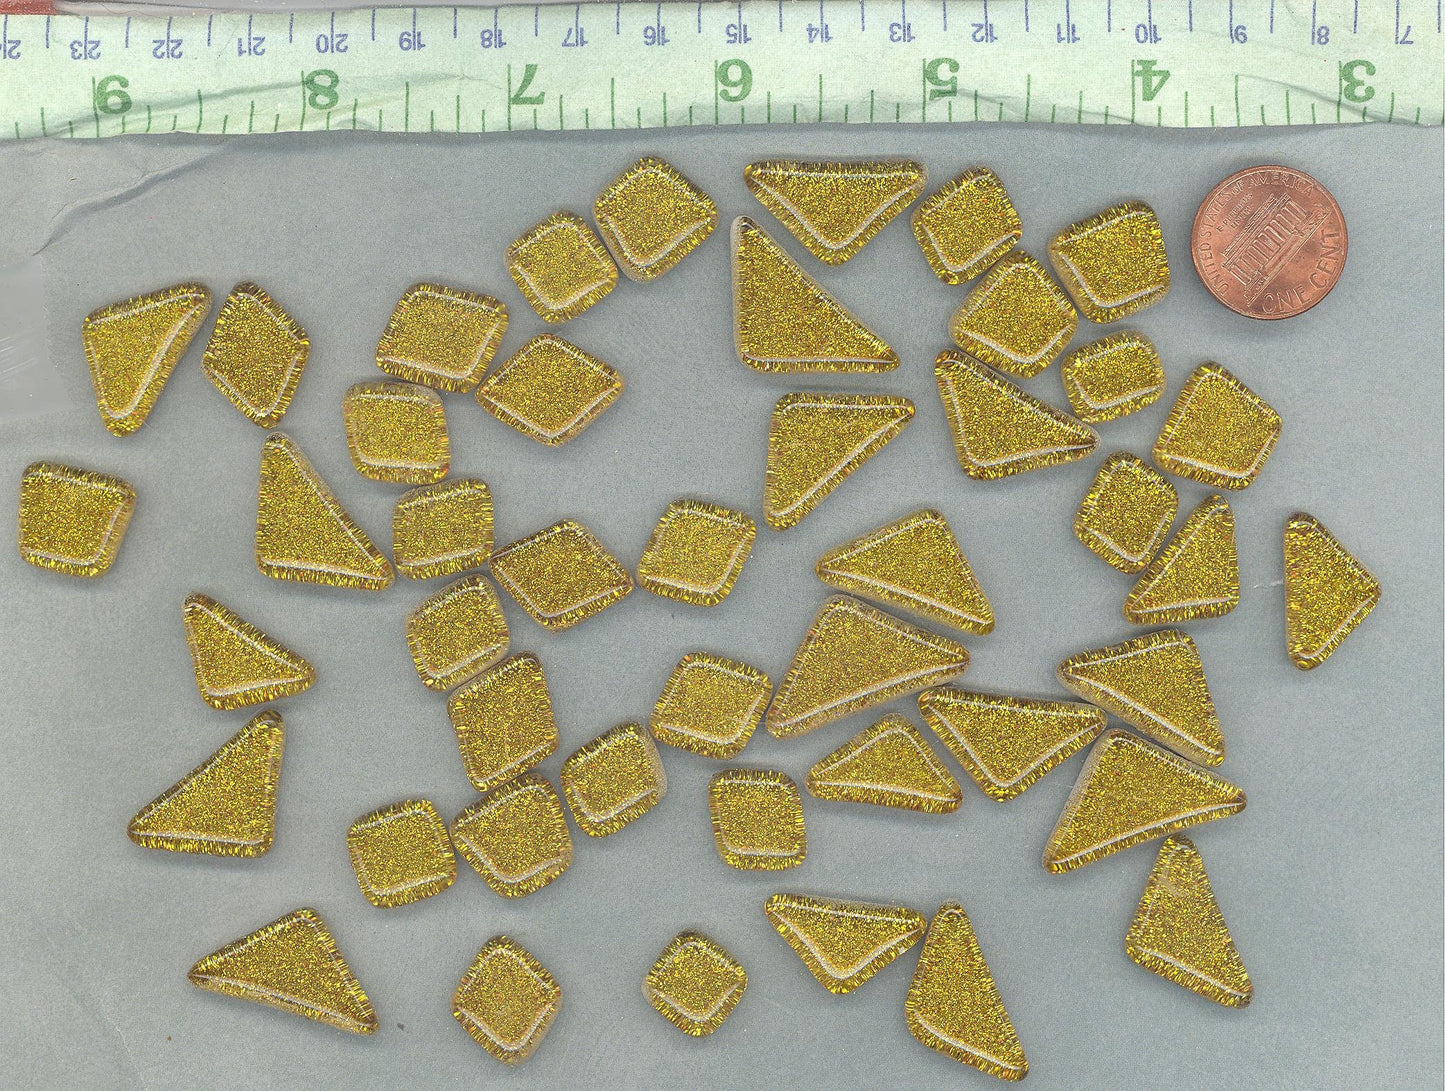 Gold Glitter Puzzle Tiles - 100 grams in Assorted Shapes Glass Mosaic Tiles